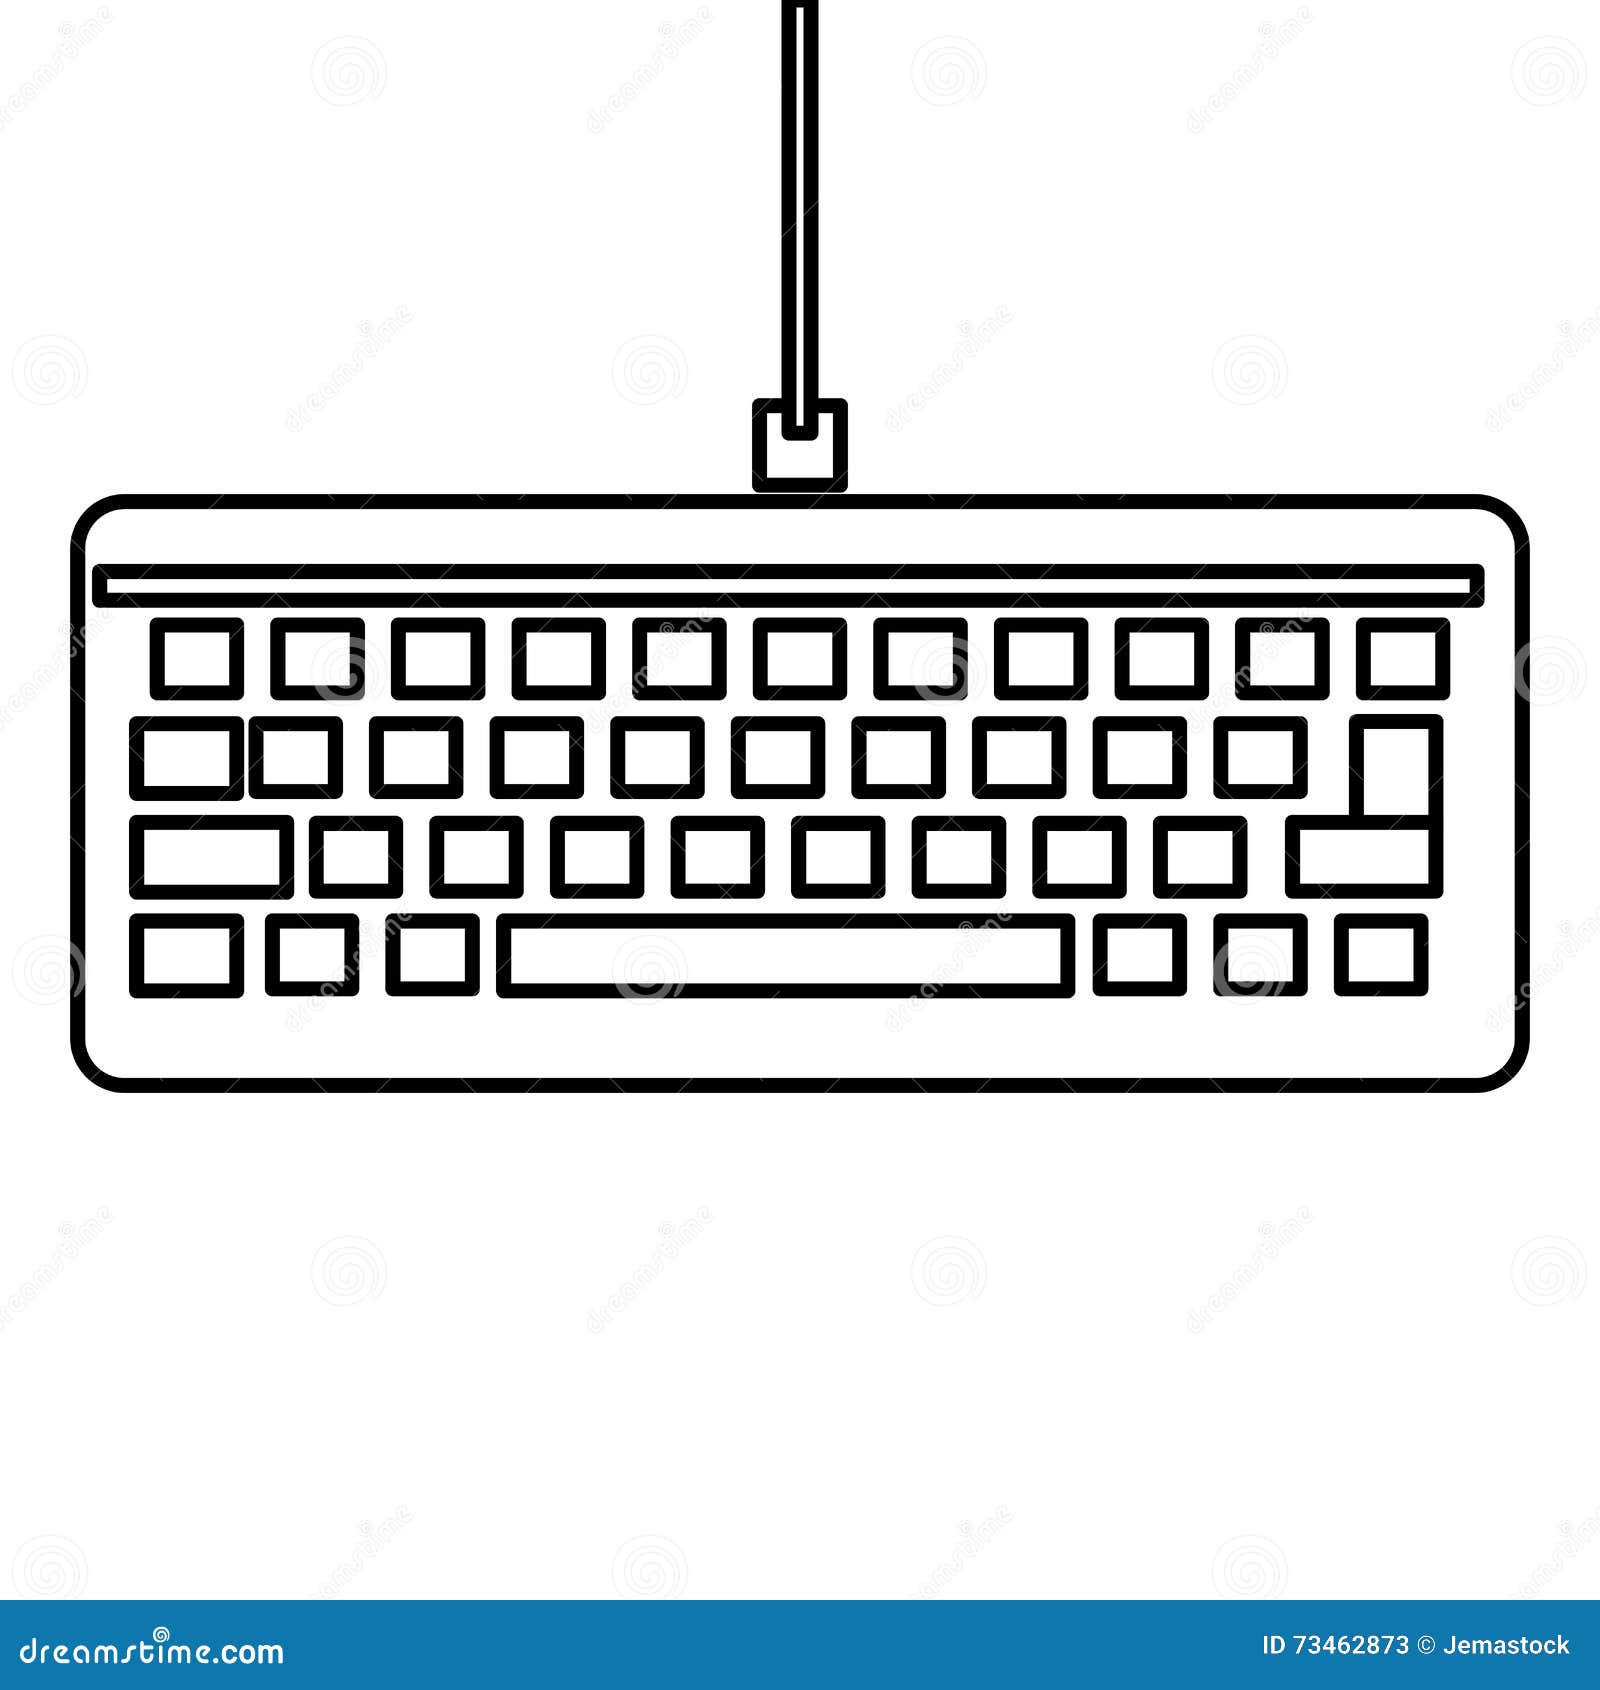 How to draw computer keyboard step by step so easy  YouTube  Computer  drawing Keyboard Computer keyboard